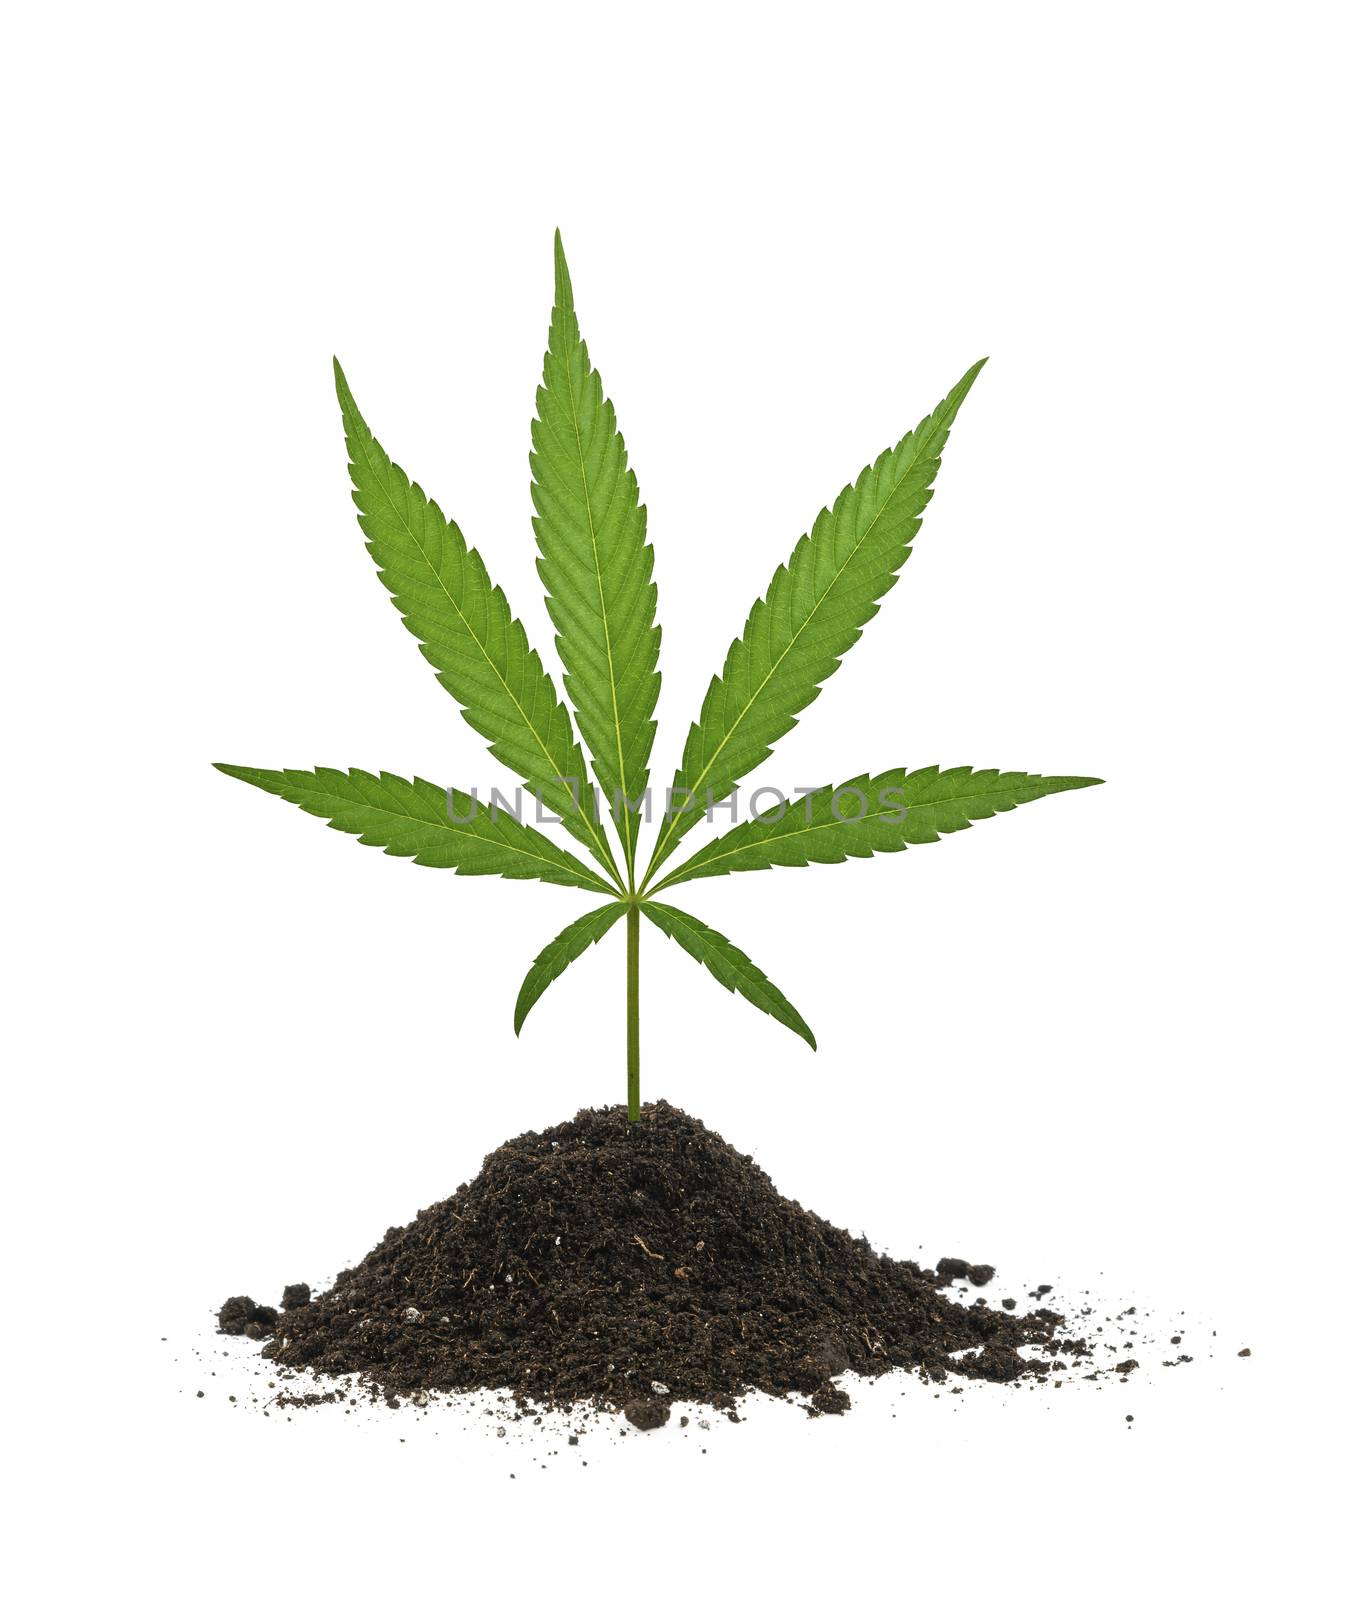 Close up one fresh green cannabis or hemp leaf growing out of soil heap isolated on white background, low angle side view